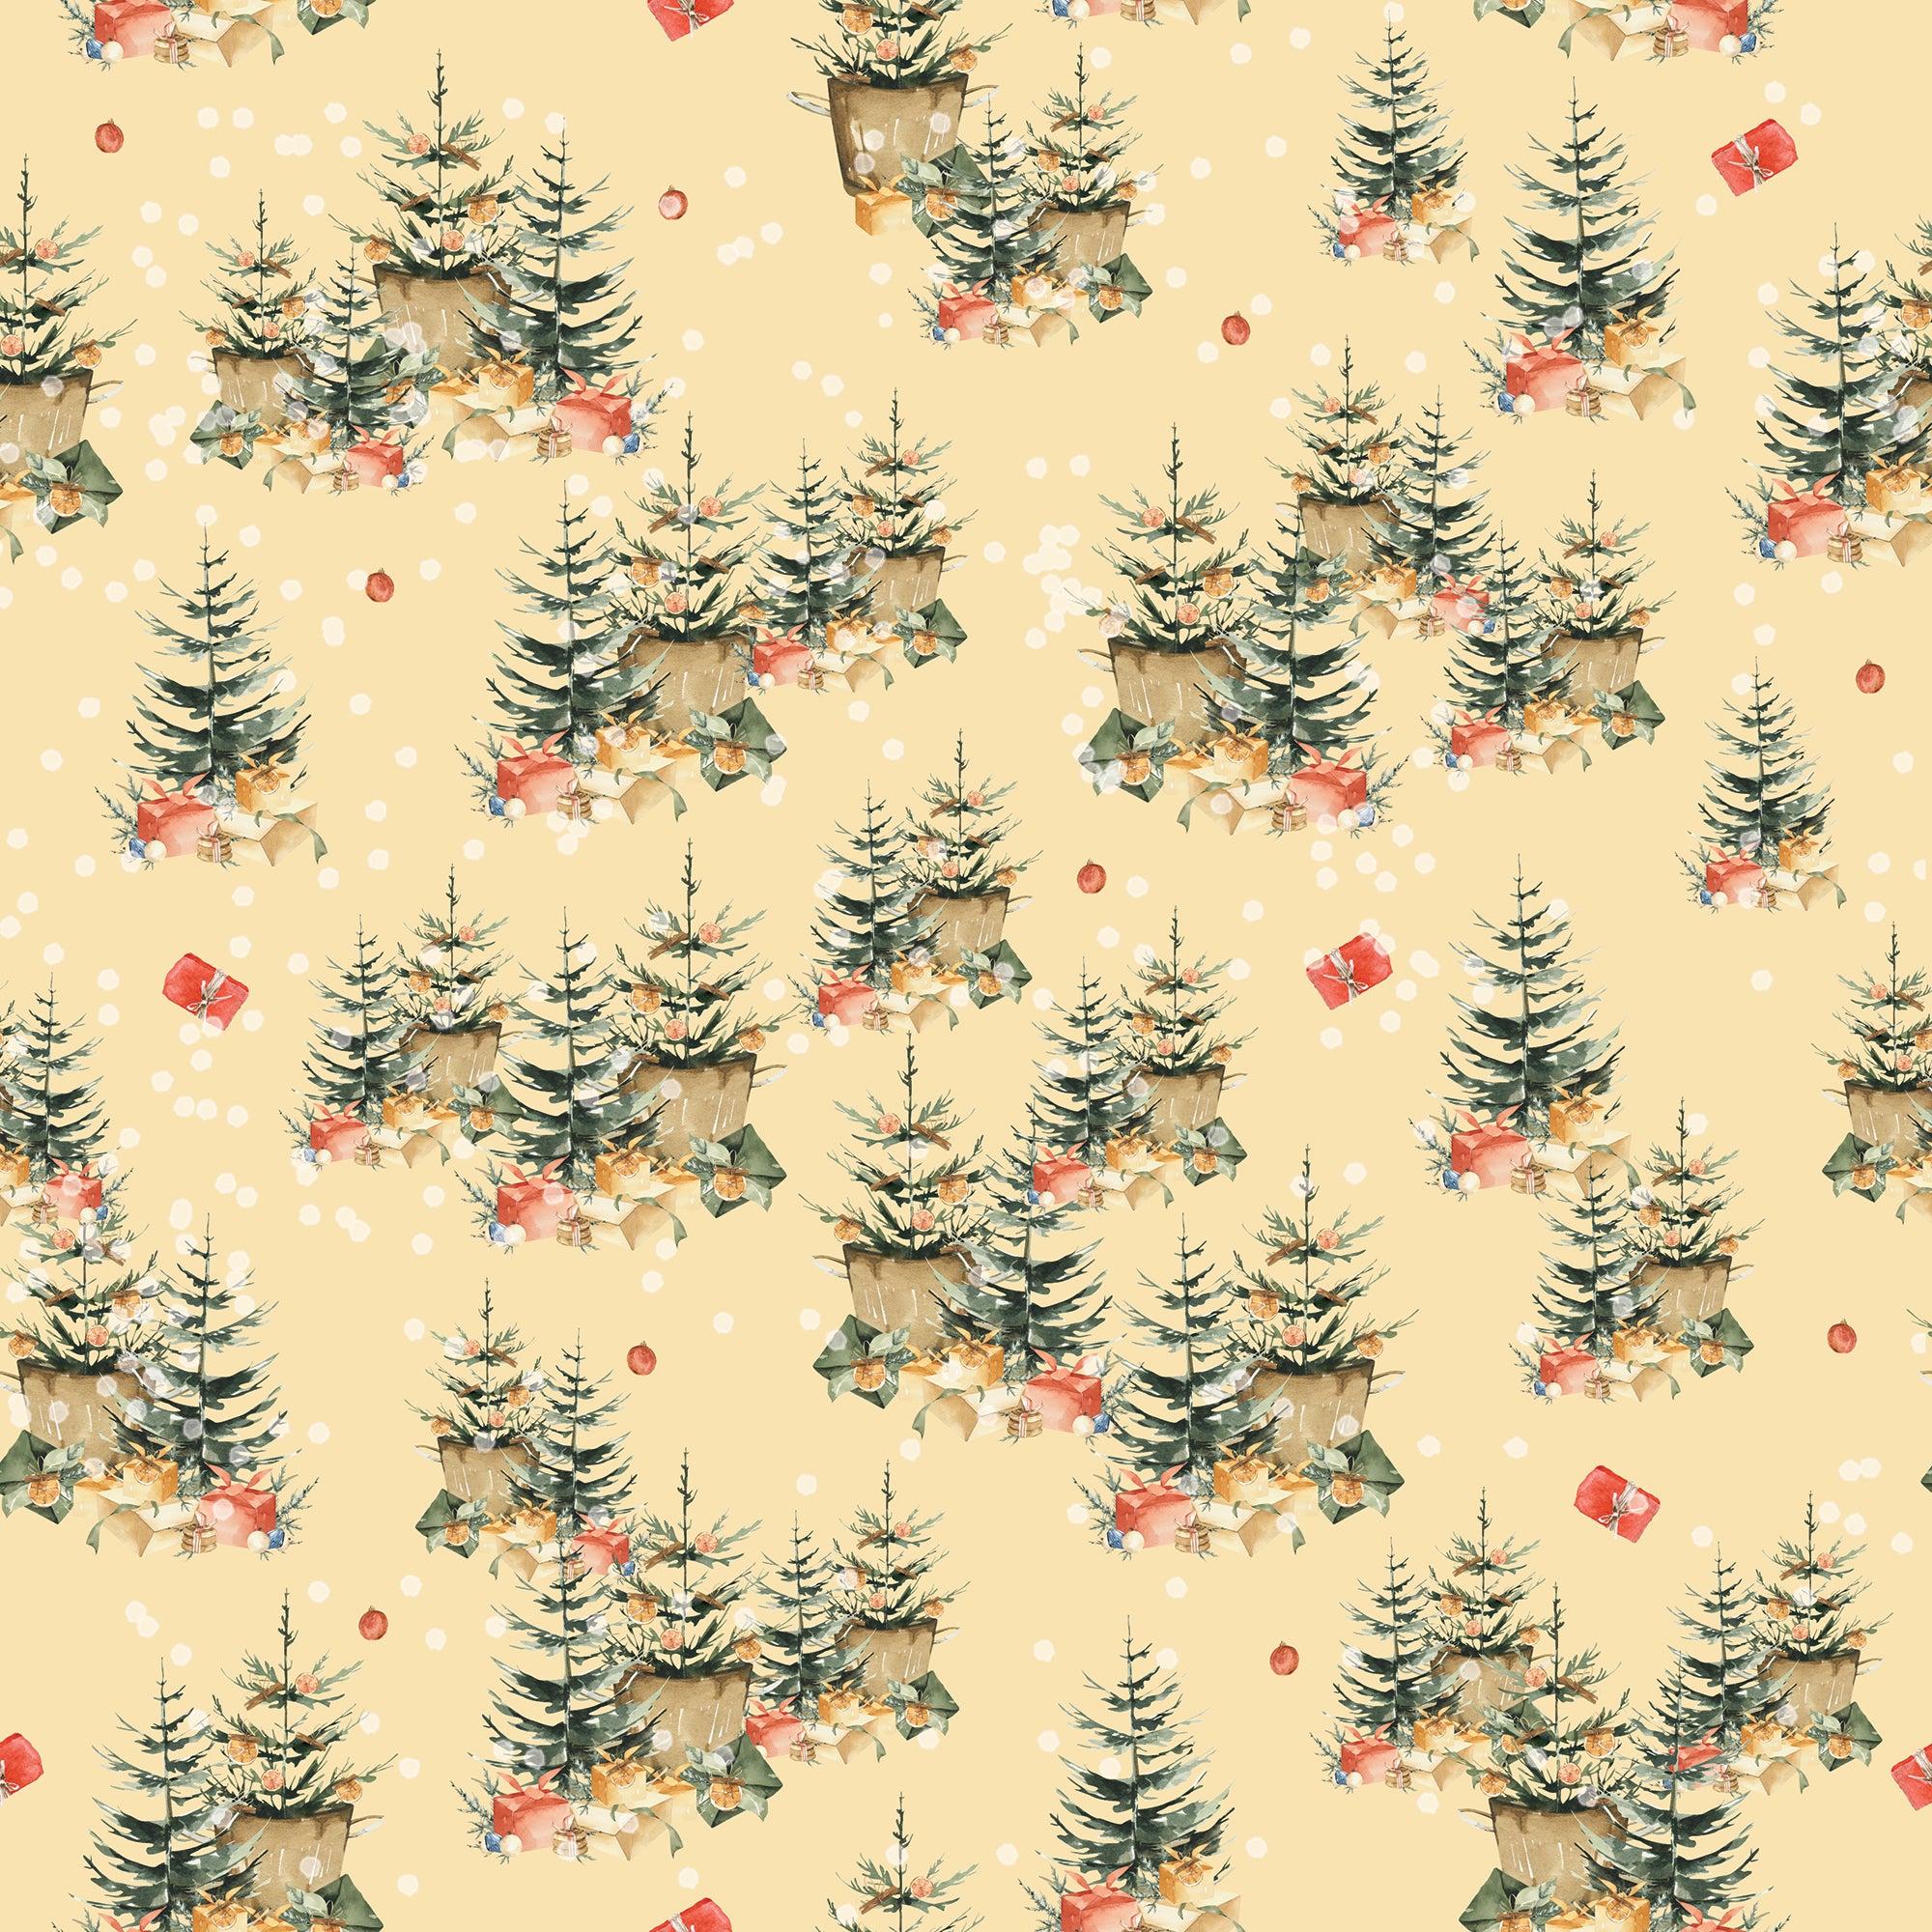 Free Gift Wrapping Paper Mockup :: Behance